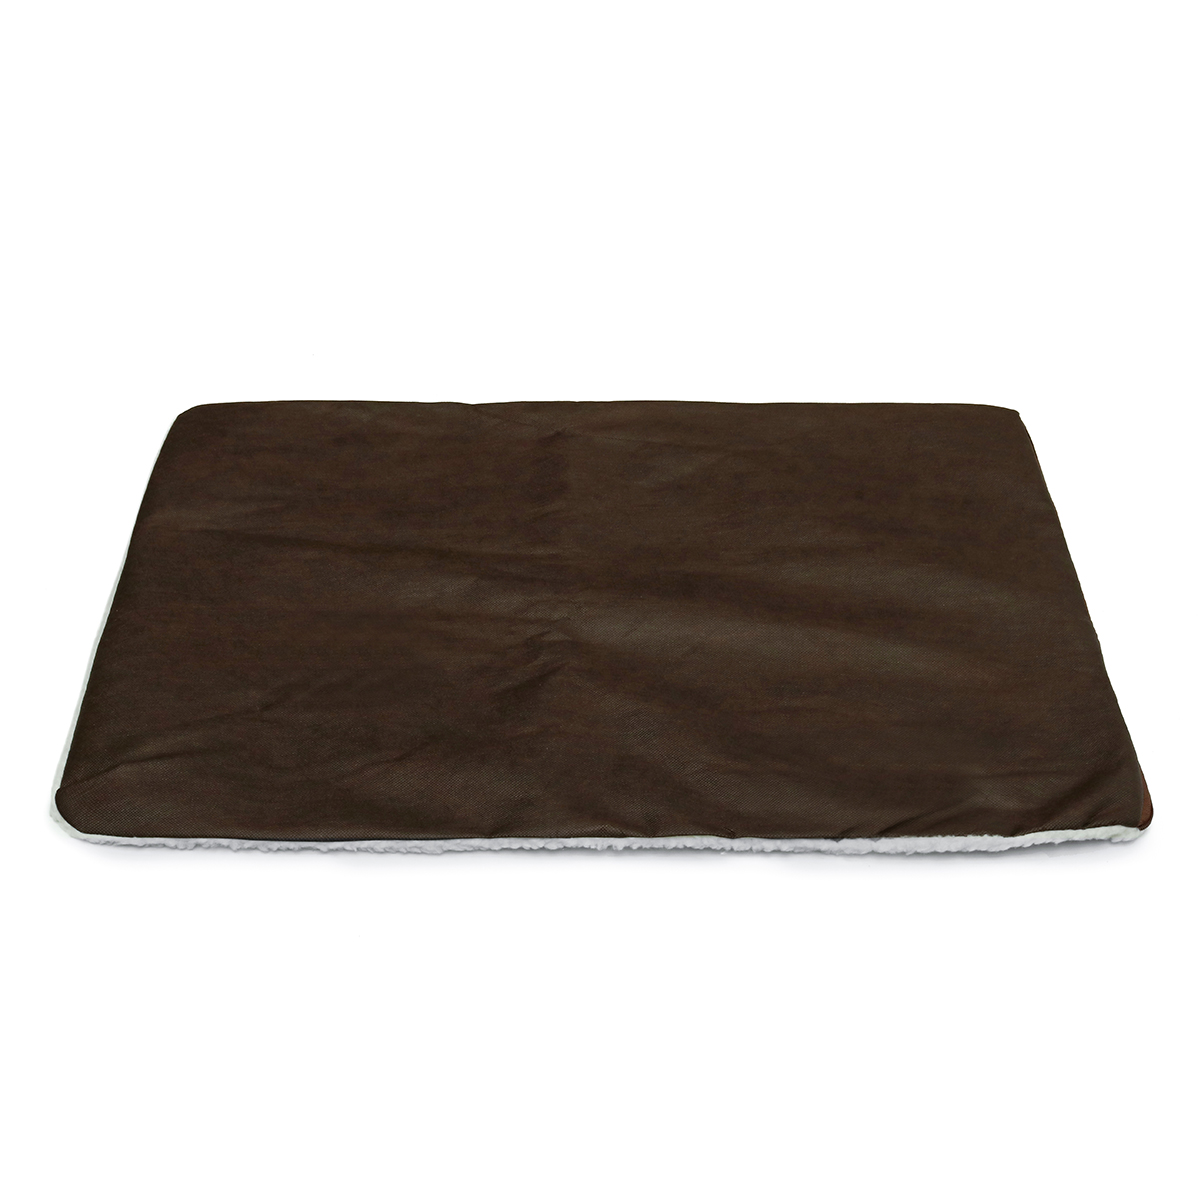 Large-Self-Heating-Dog-Bed-Fleece-Mat-Soft-Warm-Pet-Cat-Rug-Thermal-Washable-Pad-1567815-6